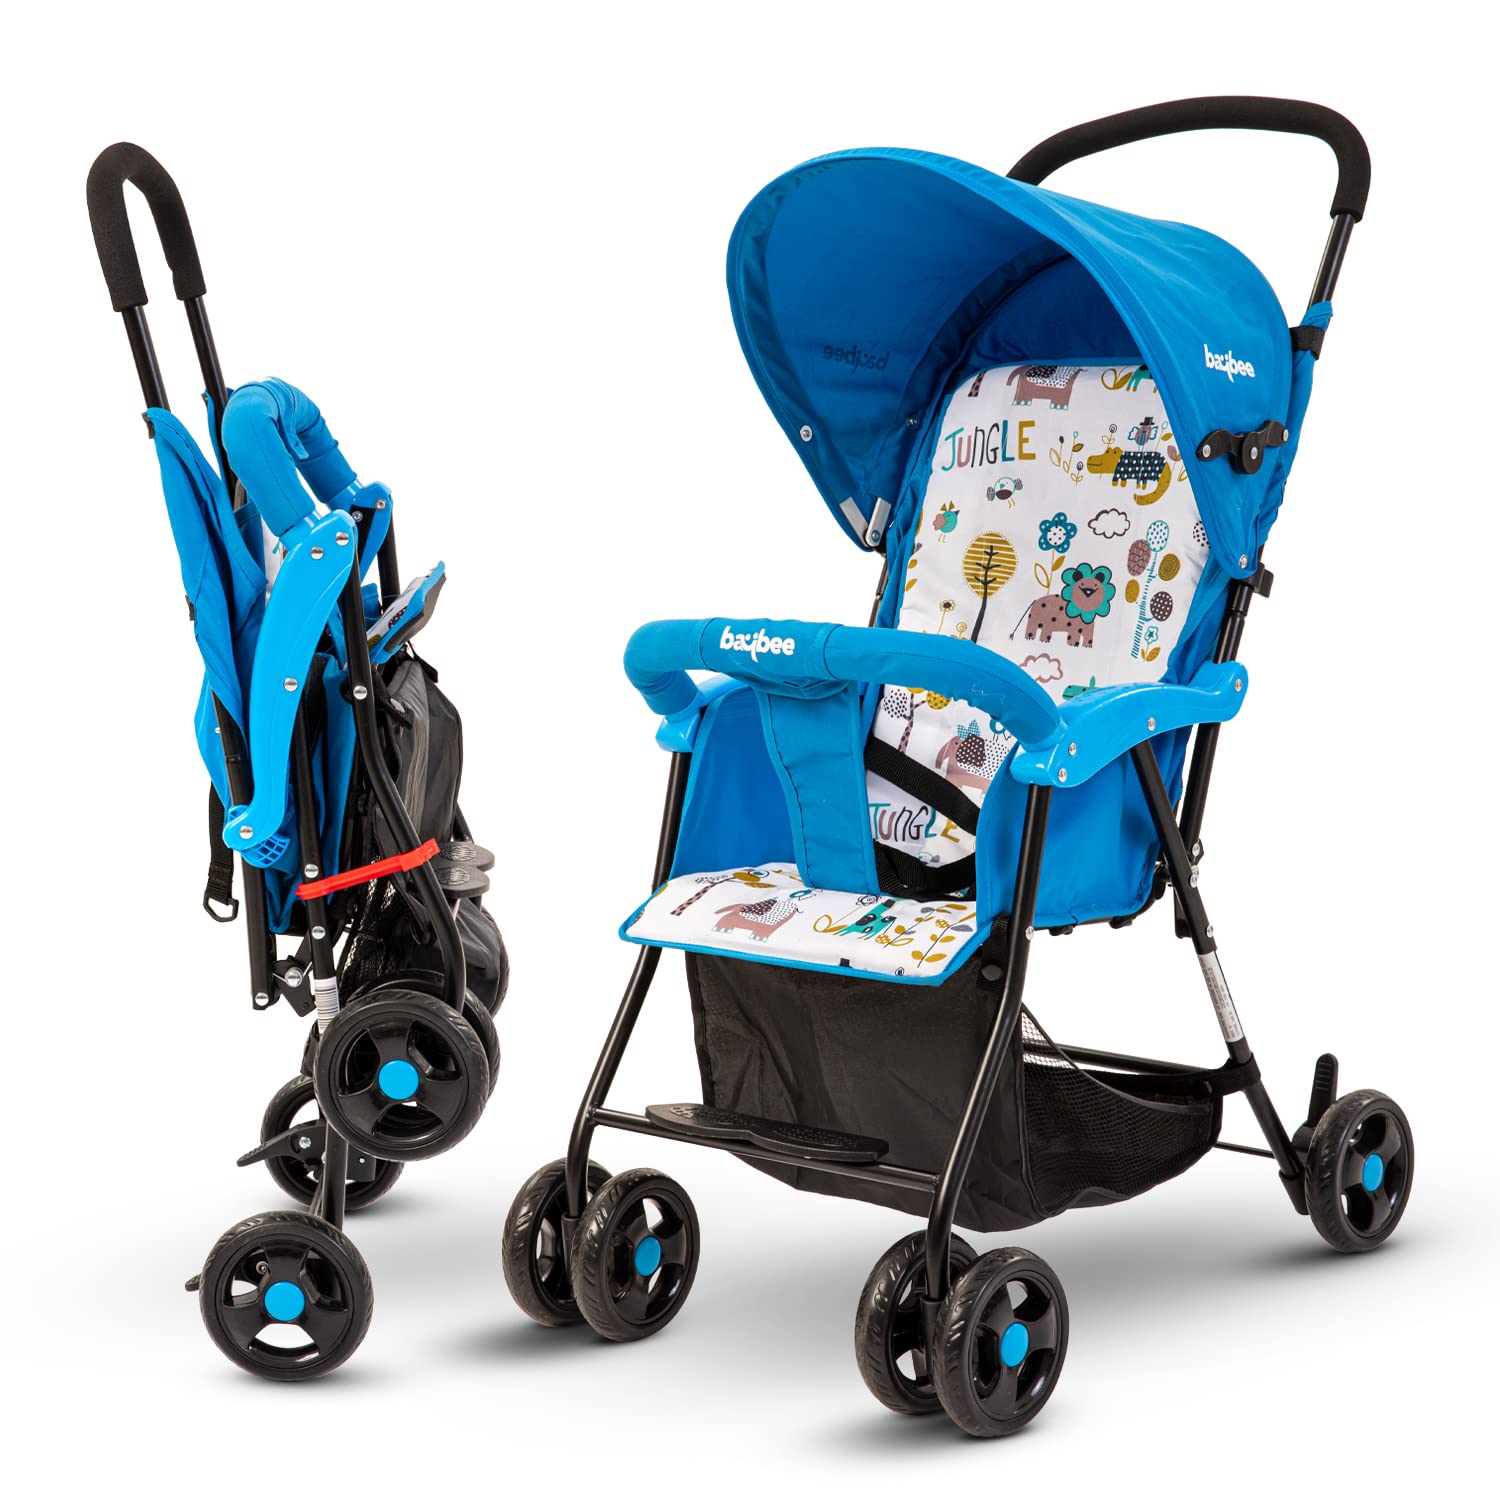 Taro Infant Baby Foldable Buggy Stroller. Travel friendly Cabin Size. NB - 3 Years (Blue)